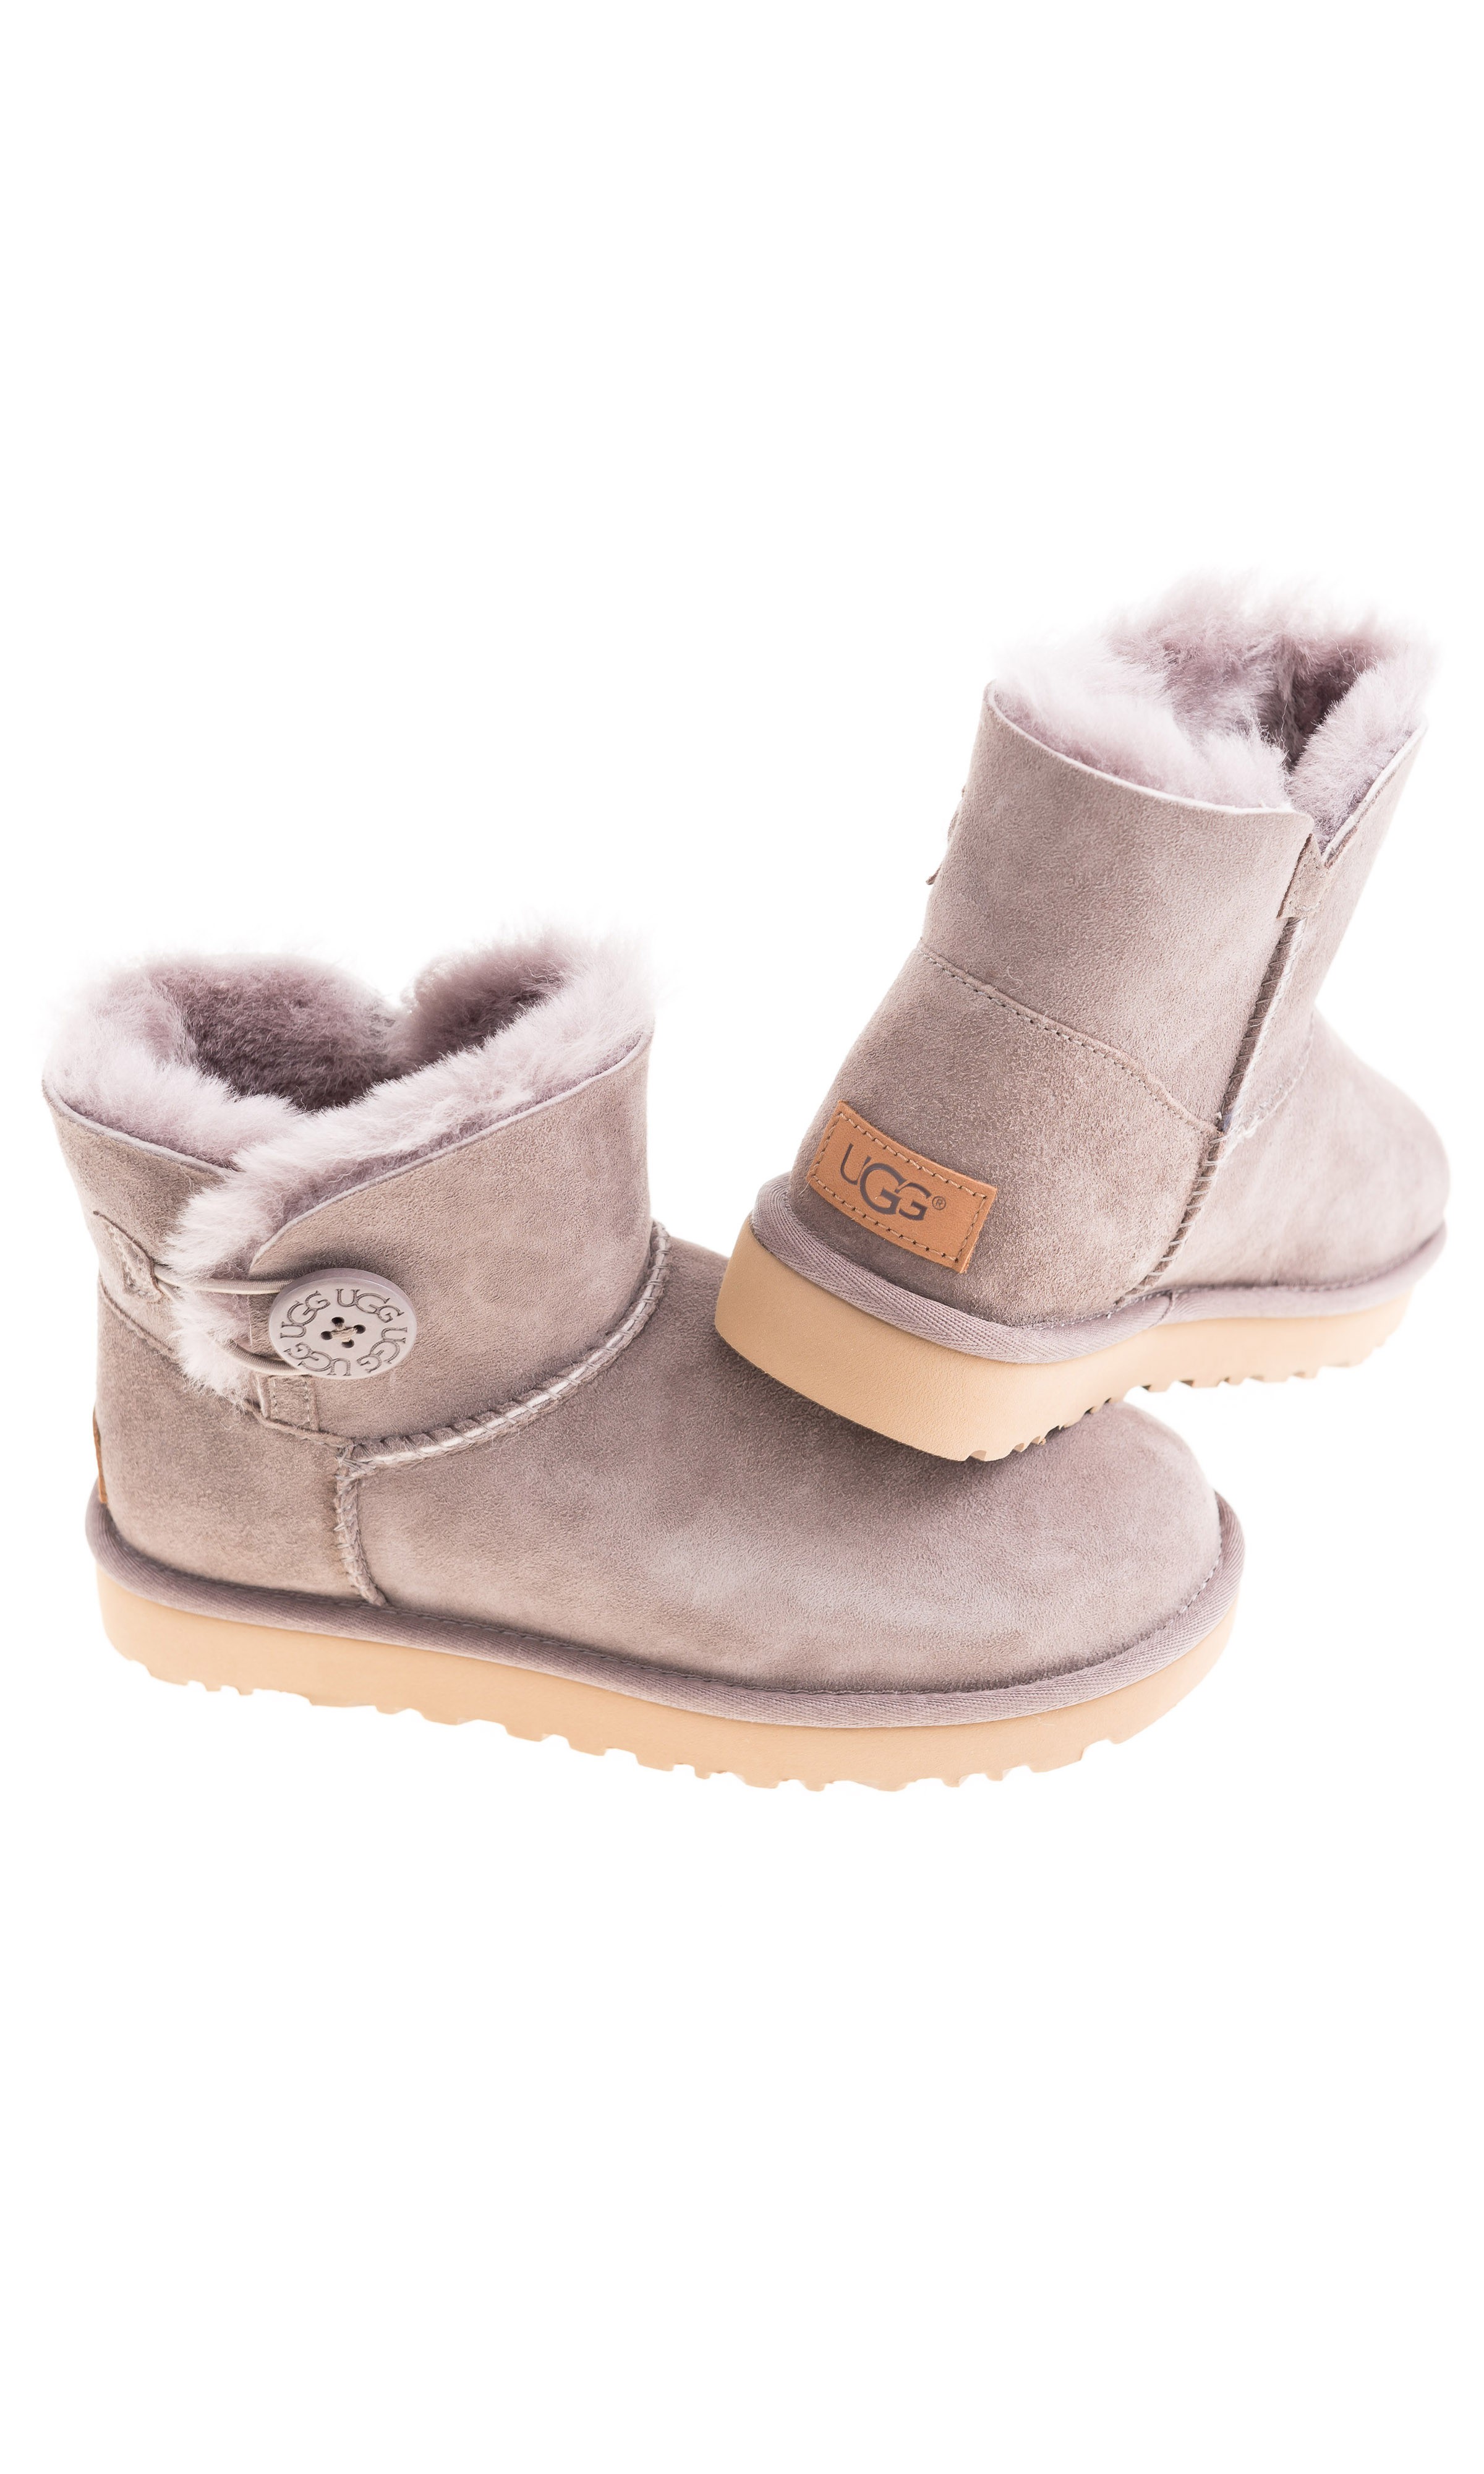 ugg boots with side buttons